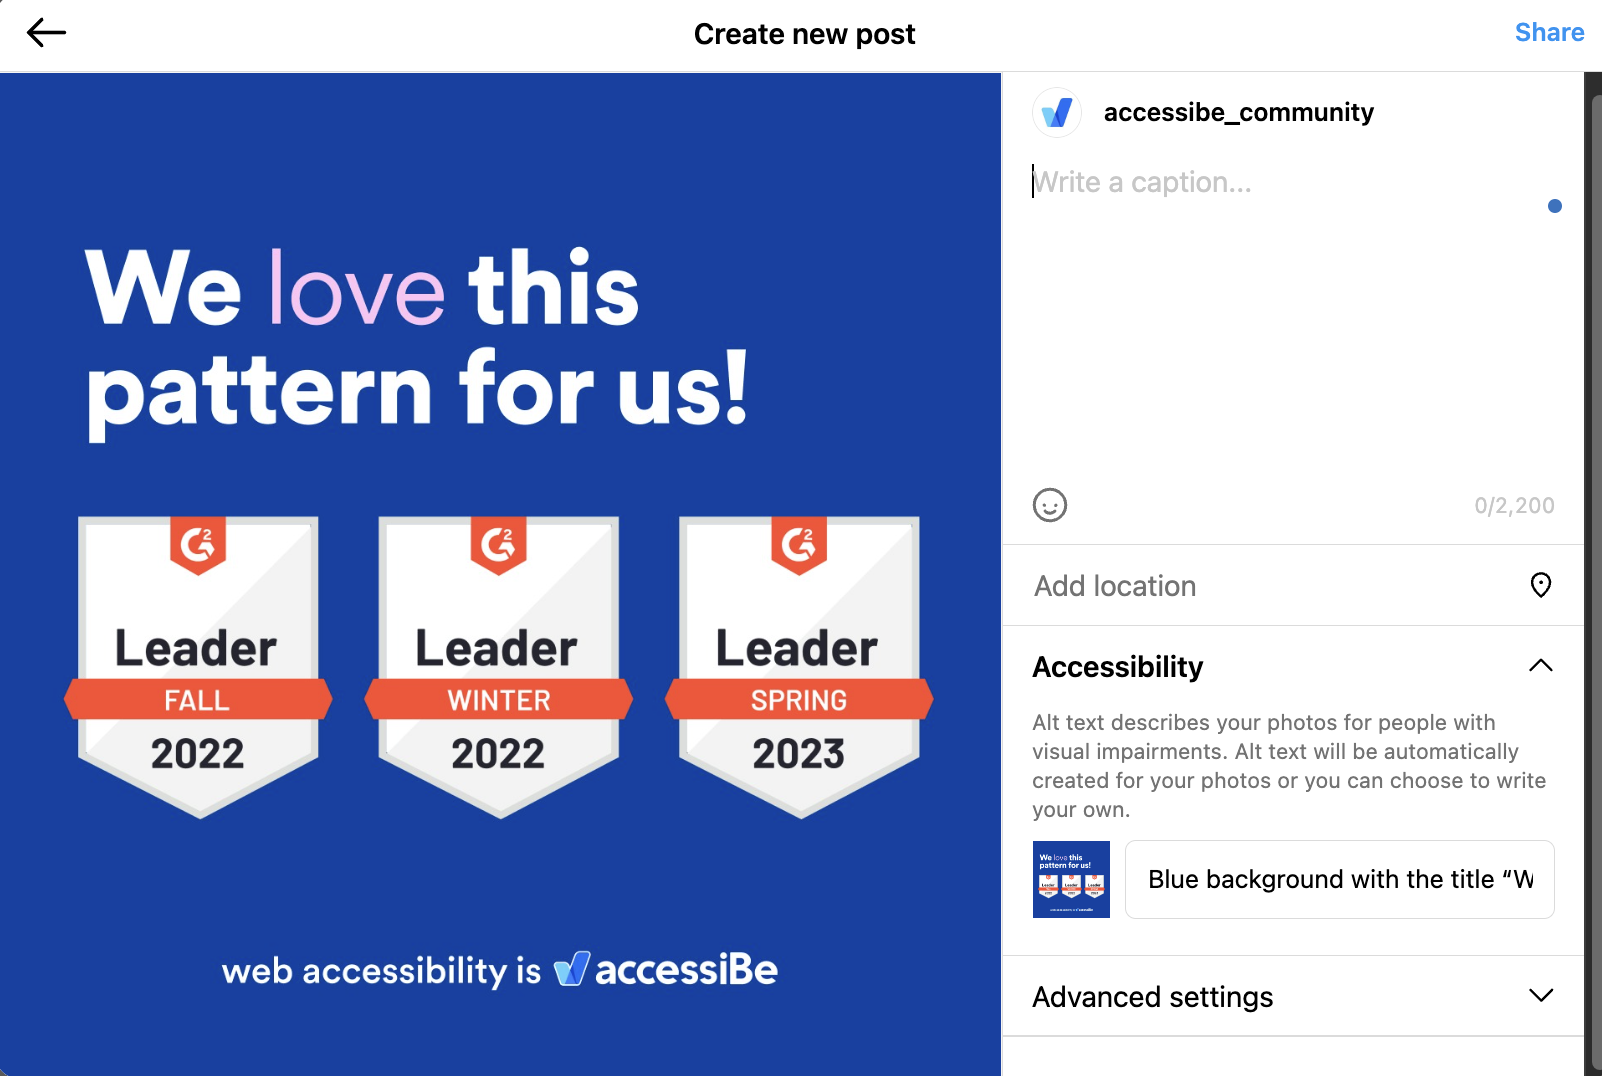 Blue background with title “We love this pattern for us!”, title written in white with the word “love” highlighted in pink. Below it, three G2 badges “Leader Fall 2022, Leader Winter 2022, Leader Spring 2023”. Below it “web accessibility is”, logo accessiBe on Instagram.